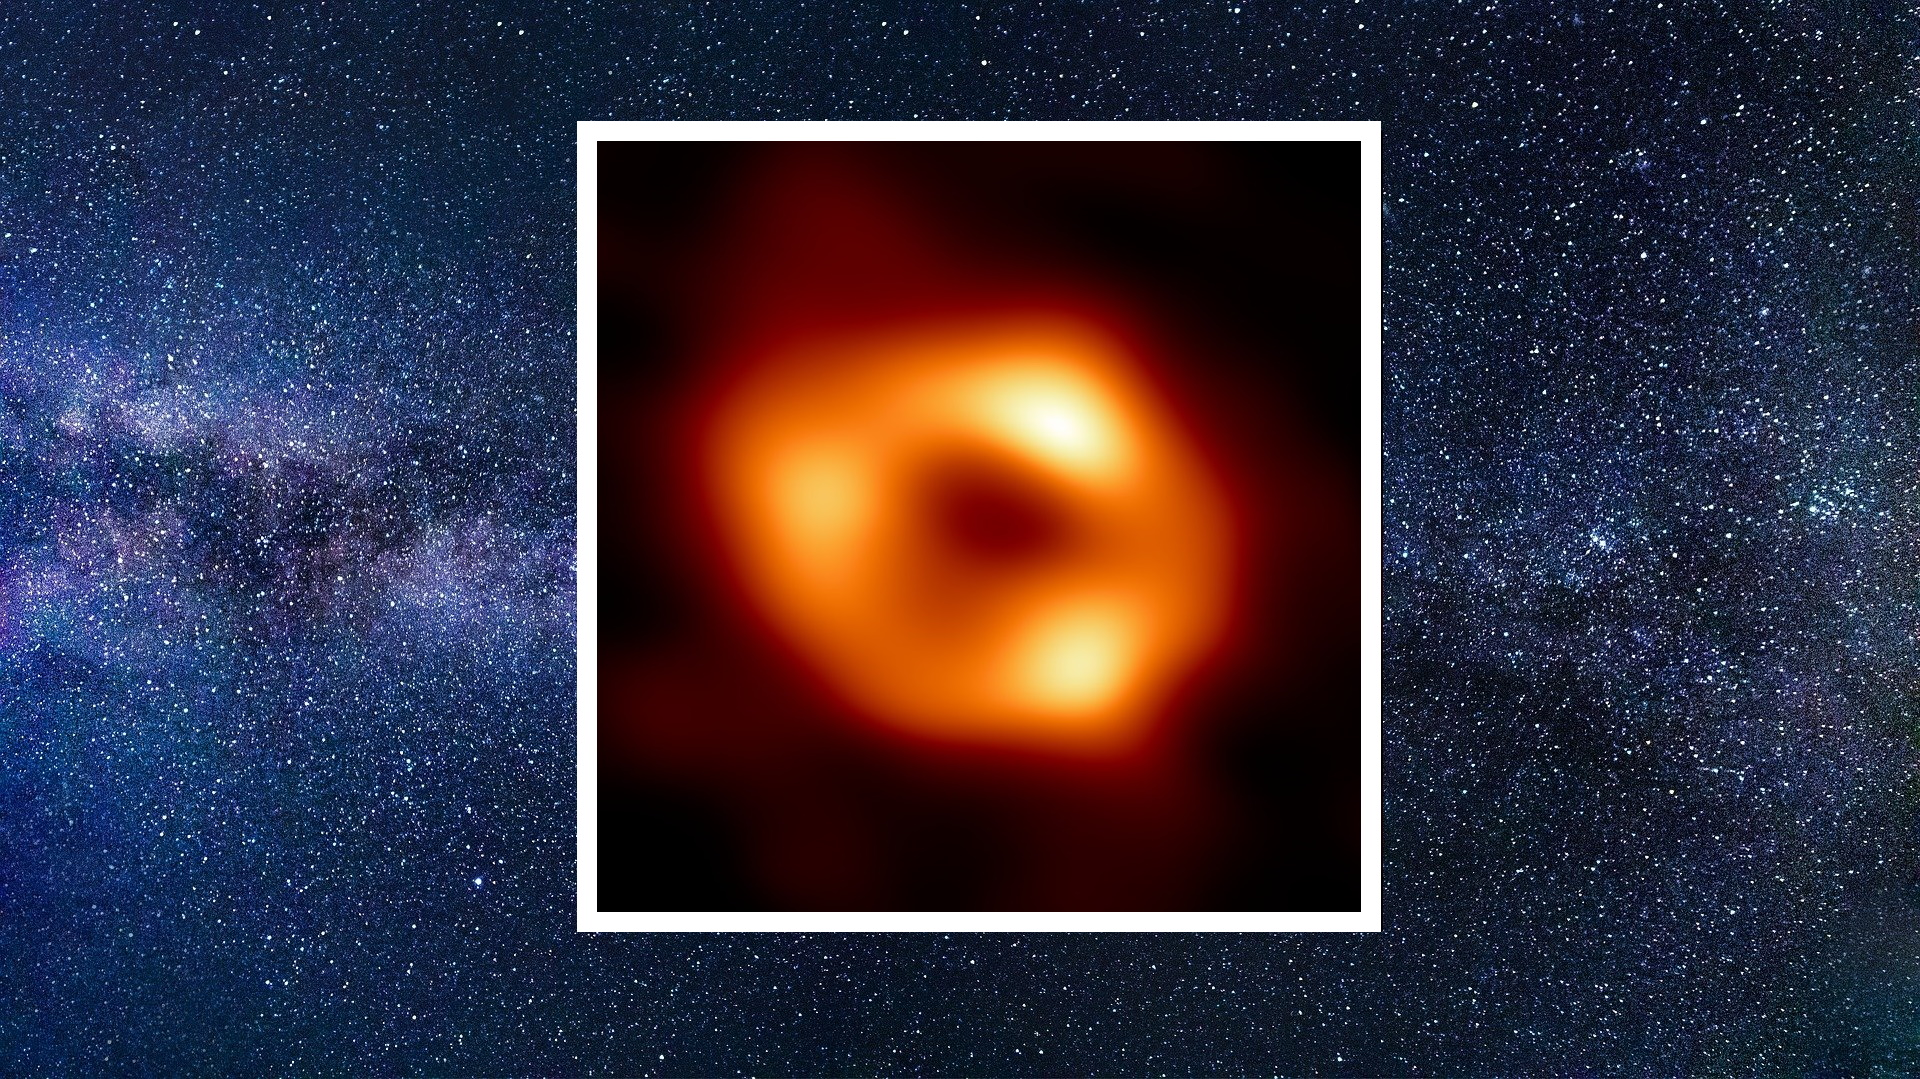 A close encounter with a Black Hole, so to speak